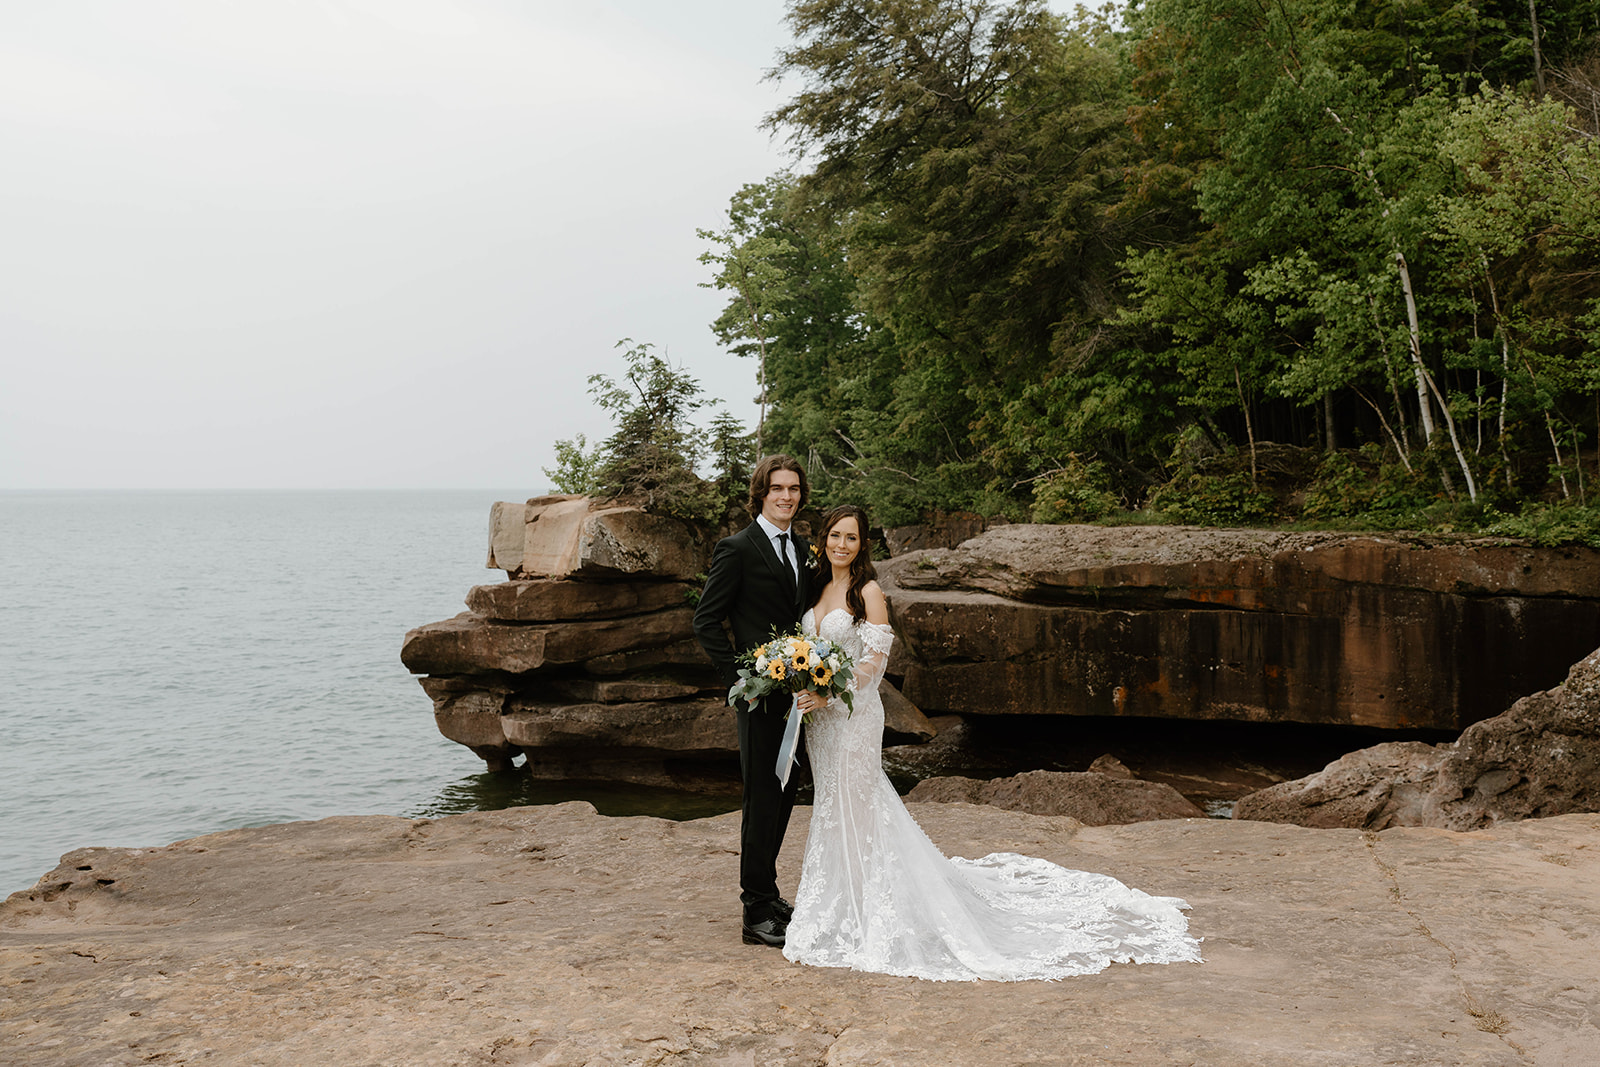 A couple who eloped on Madeline Island say their vows in front of Lake Superior